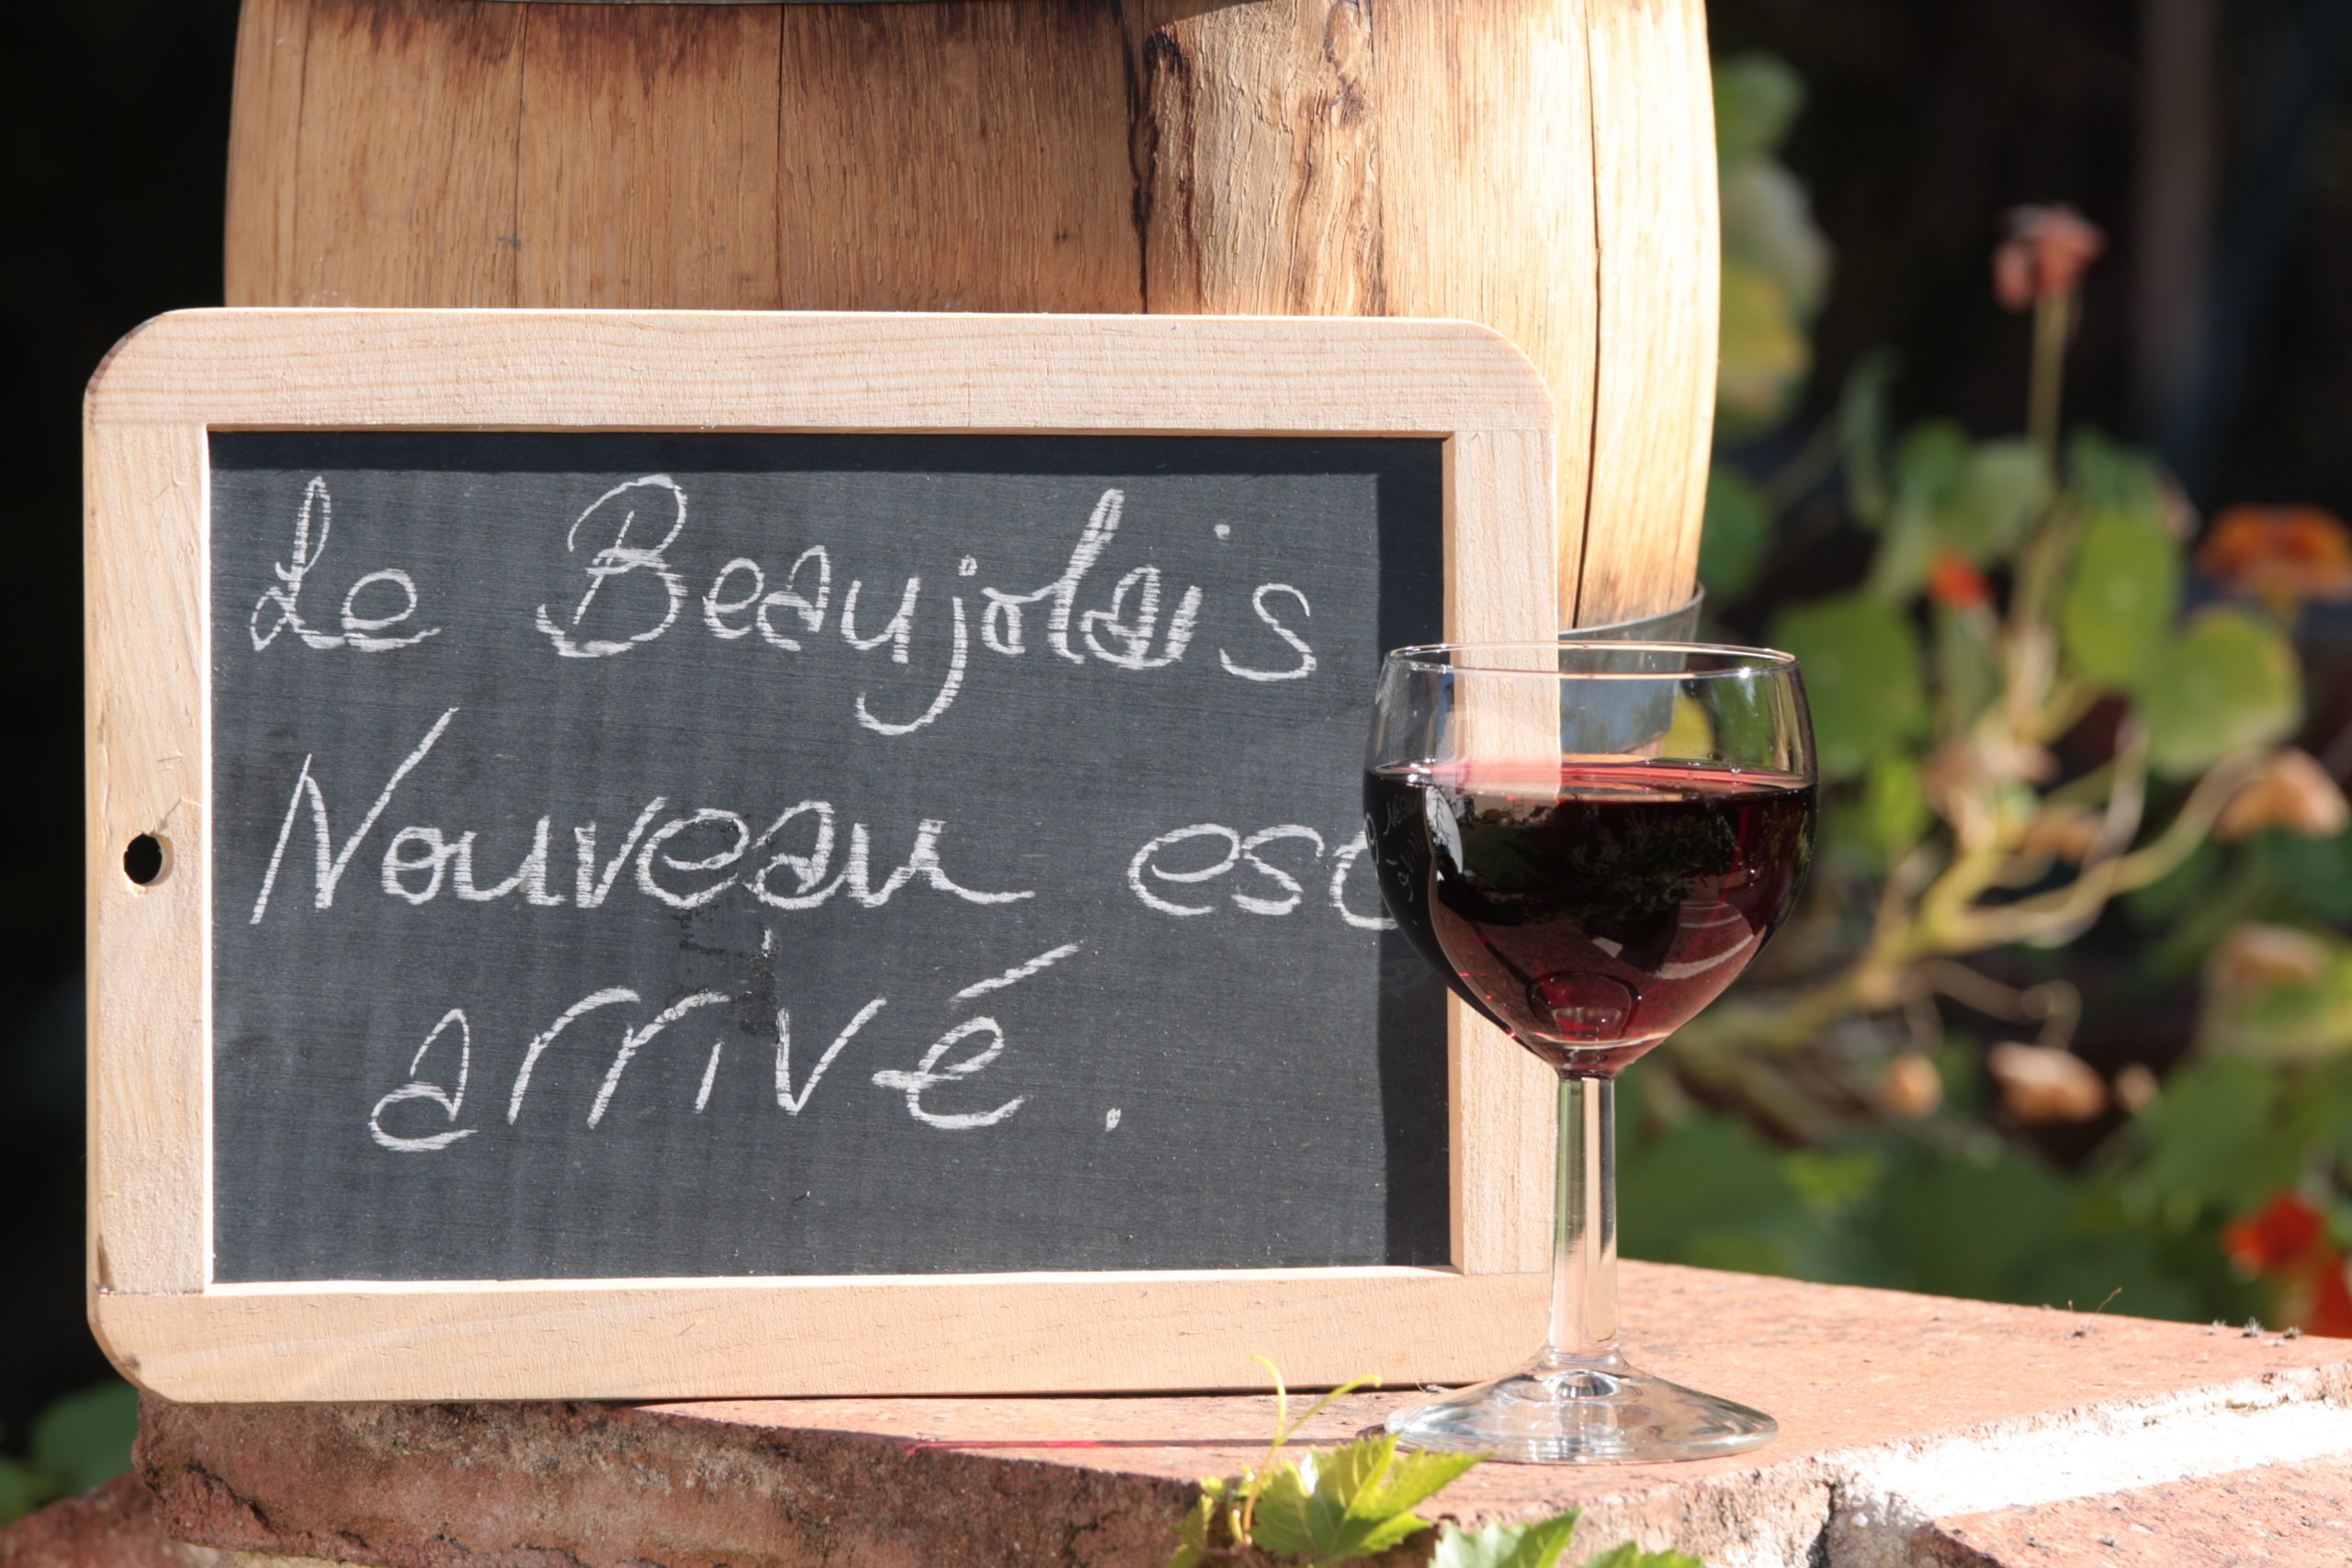 Get the holidays started with Beaujolais Nouveau Day!